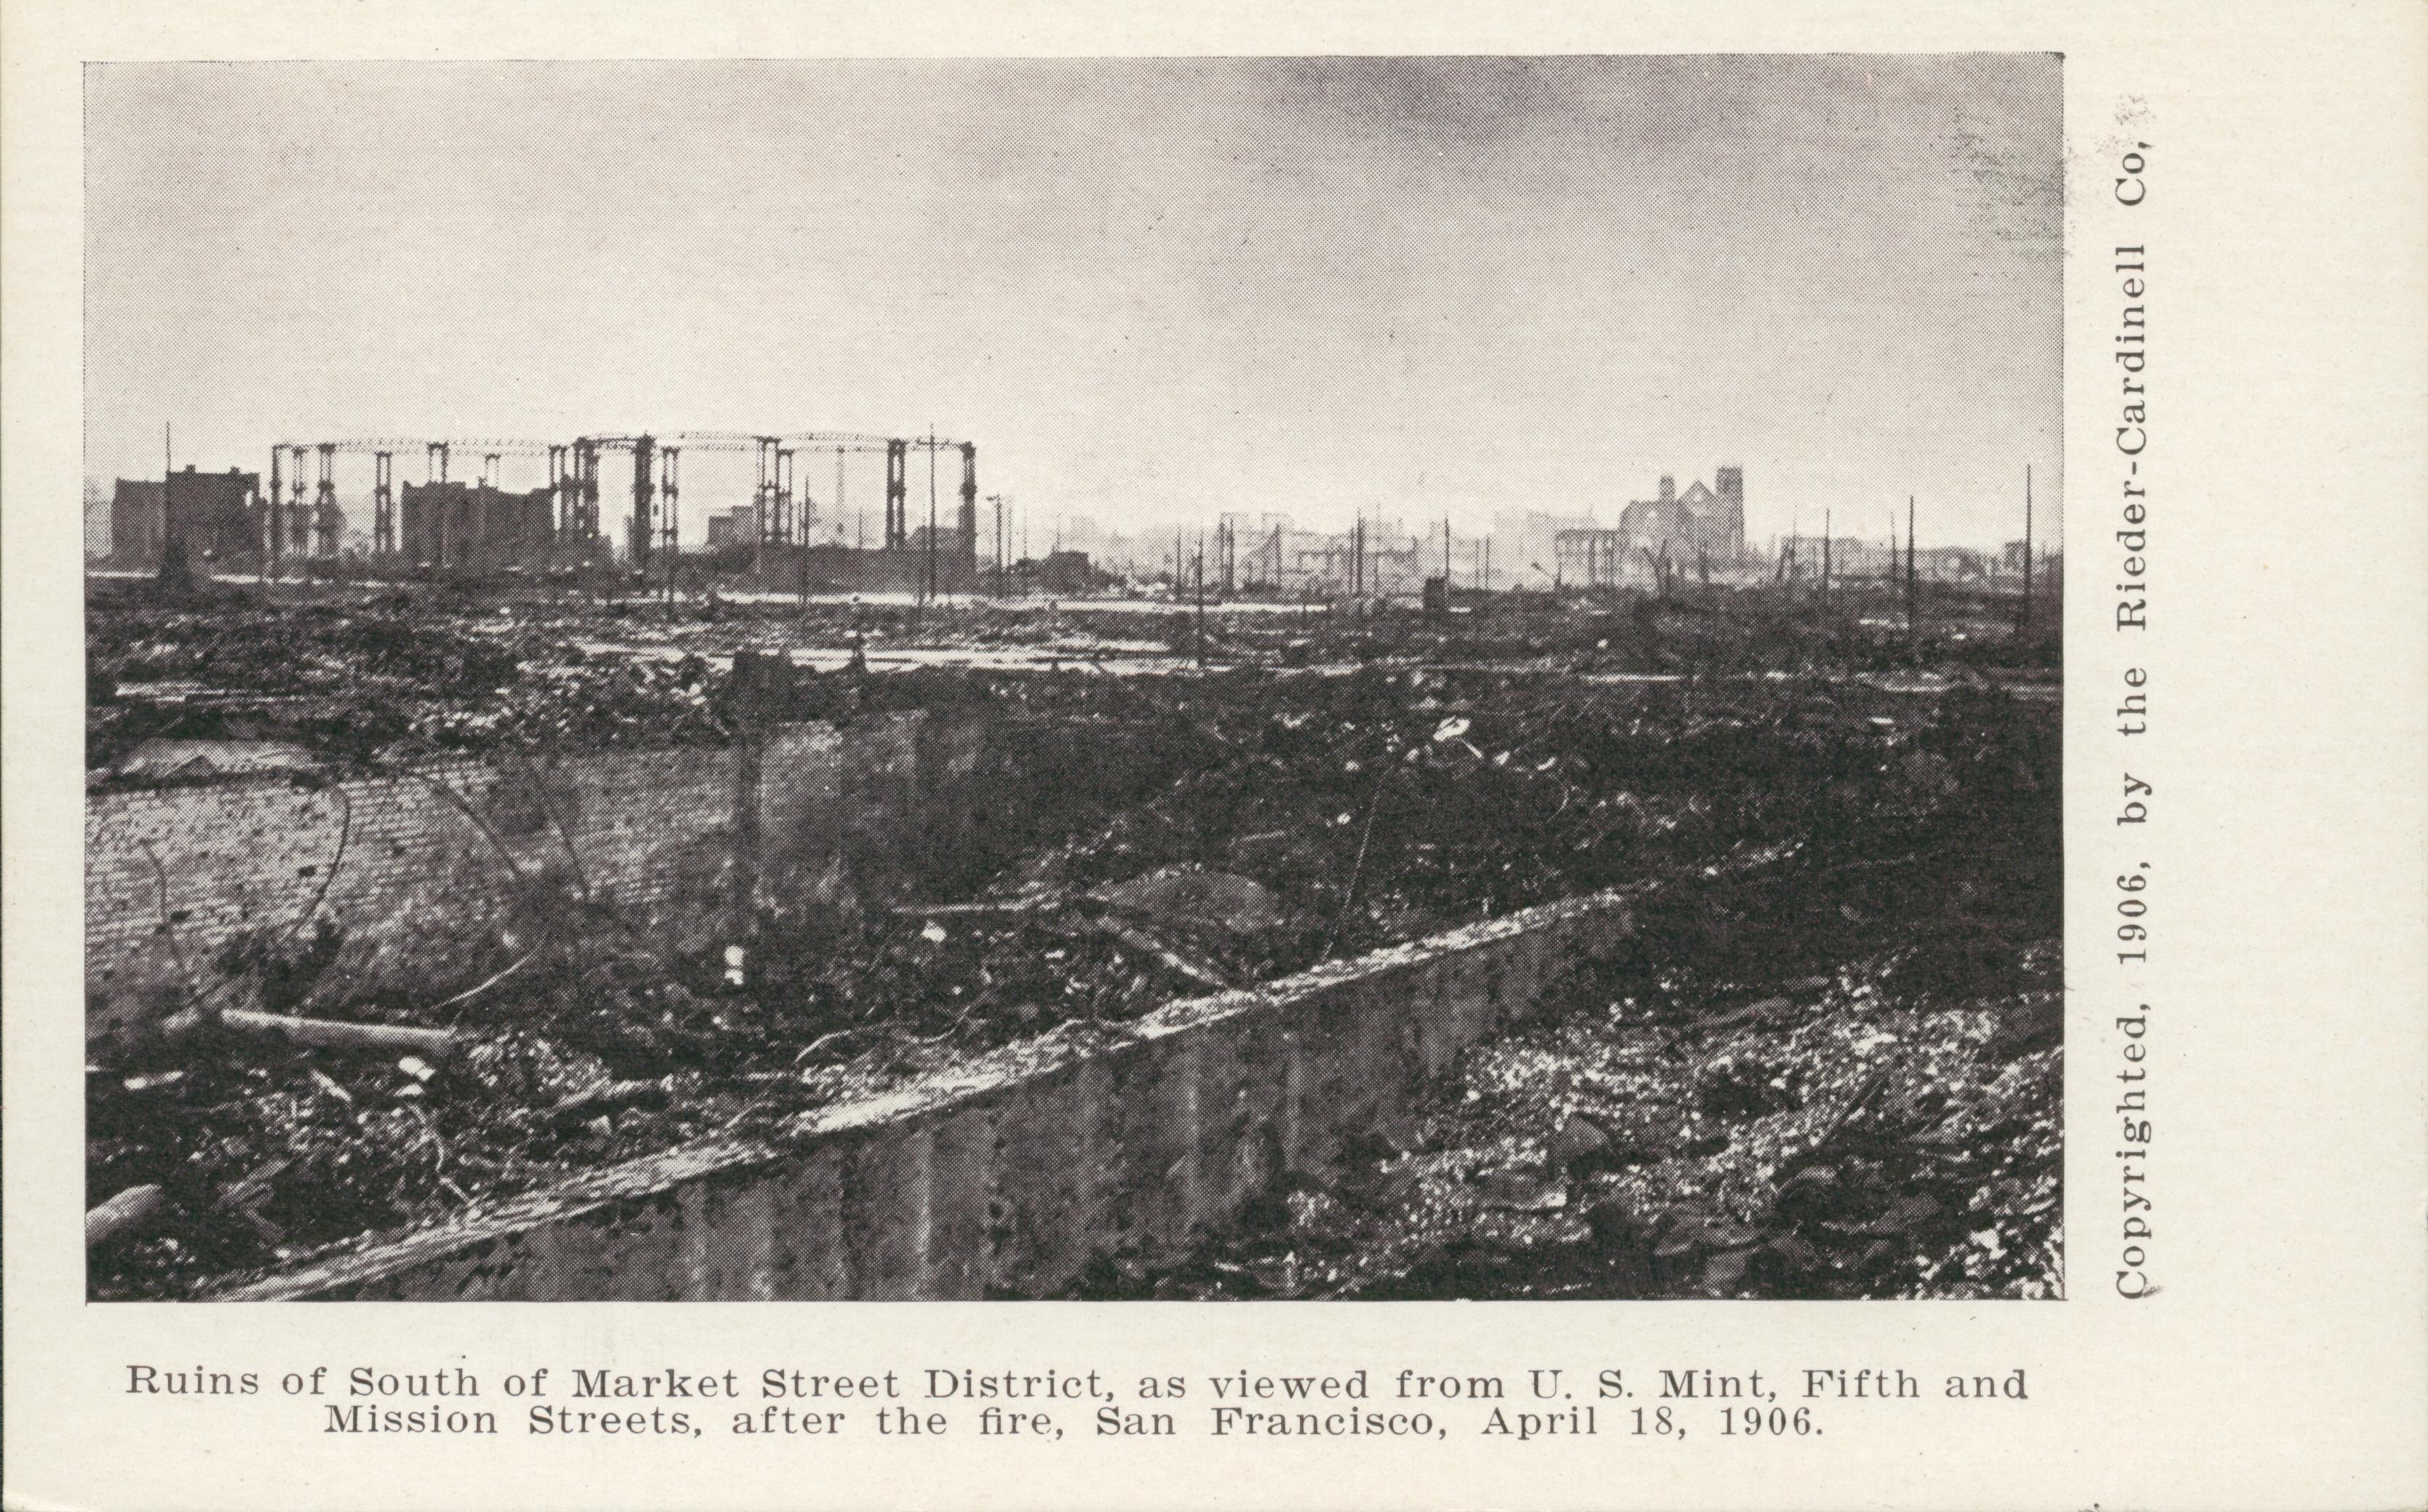 Shows a desolate landscape covered in rubble with a few ruined buildings.